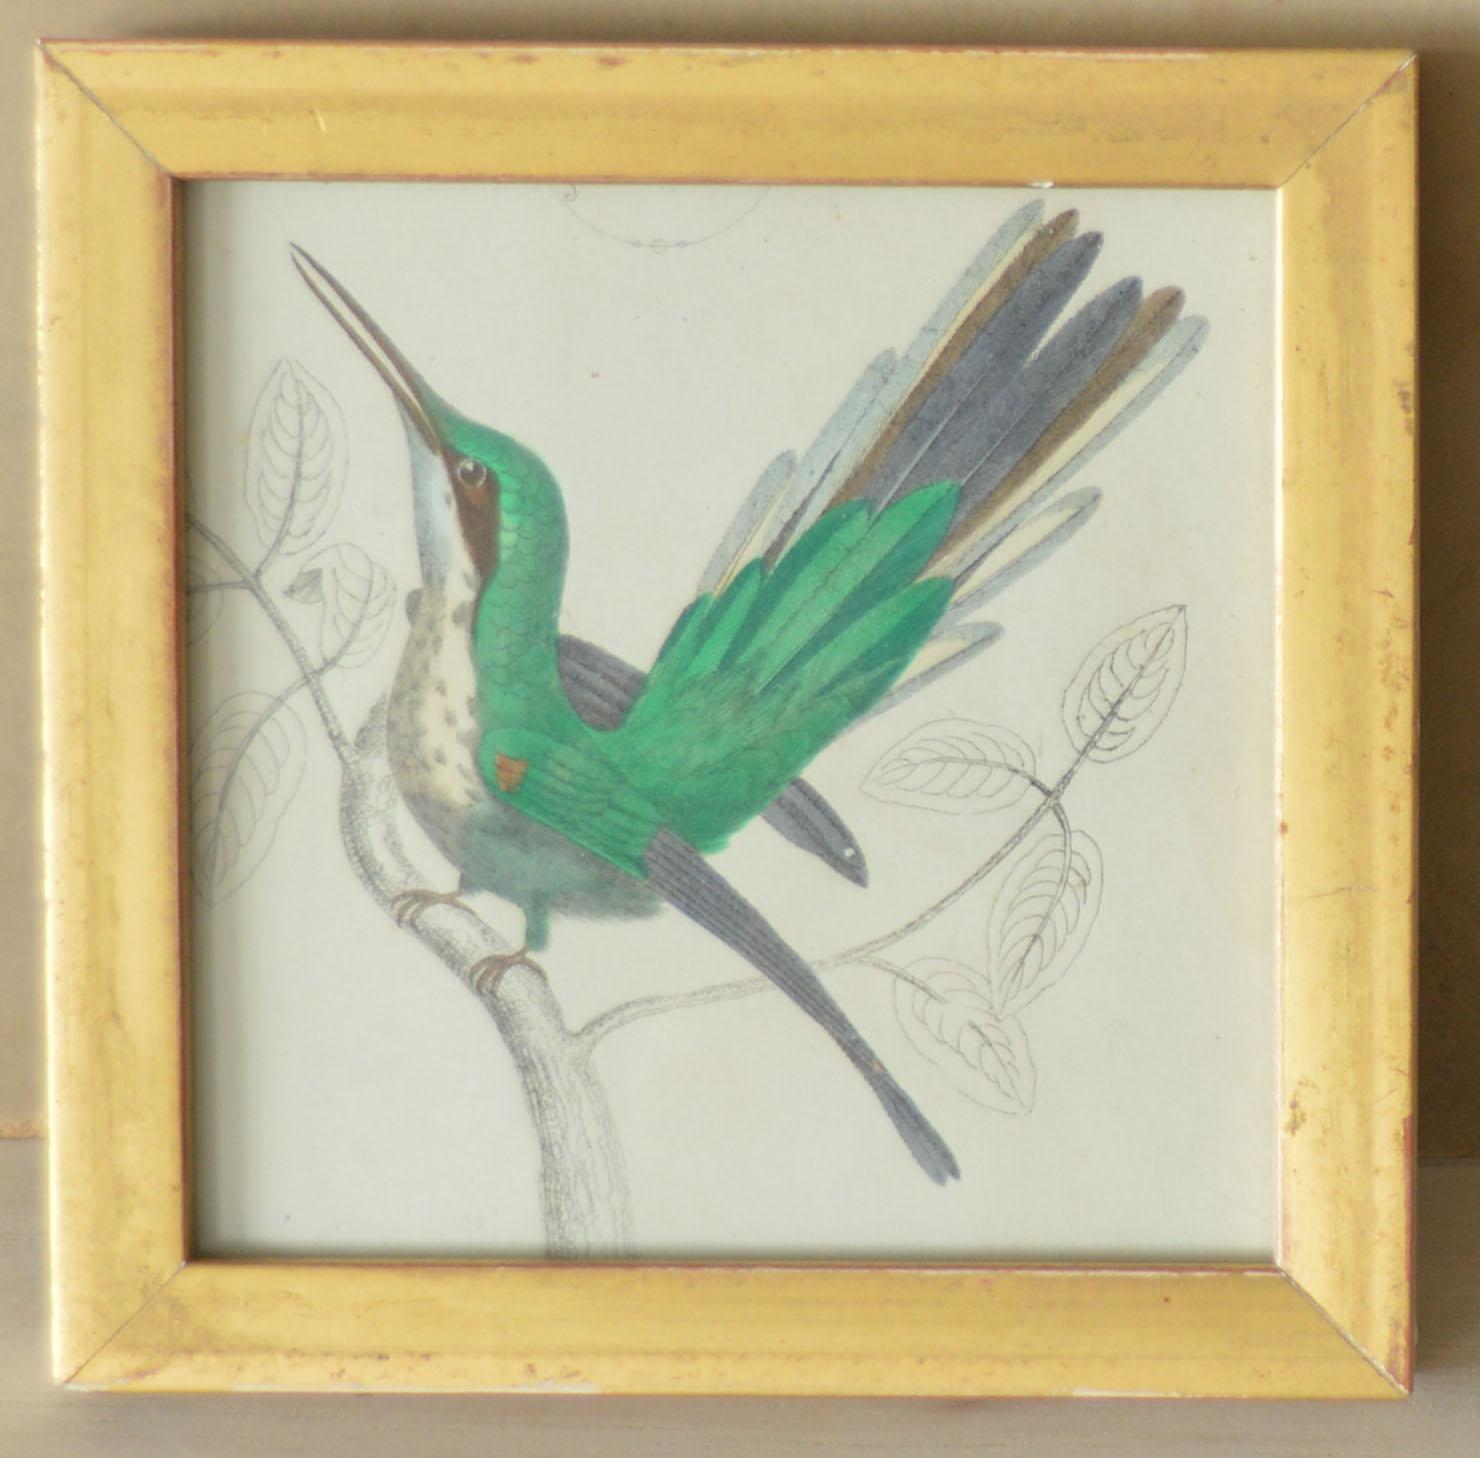 Great image of a hummingbird presented in a distressed antique gilt frame.

Lithograph after Cpt. Brown with original hand color.

Published 1847.

Free shipping.
 

 